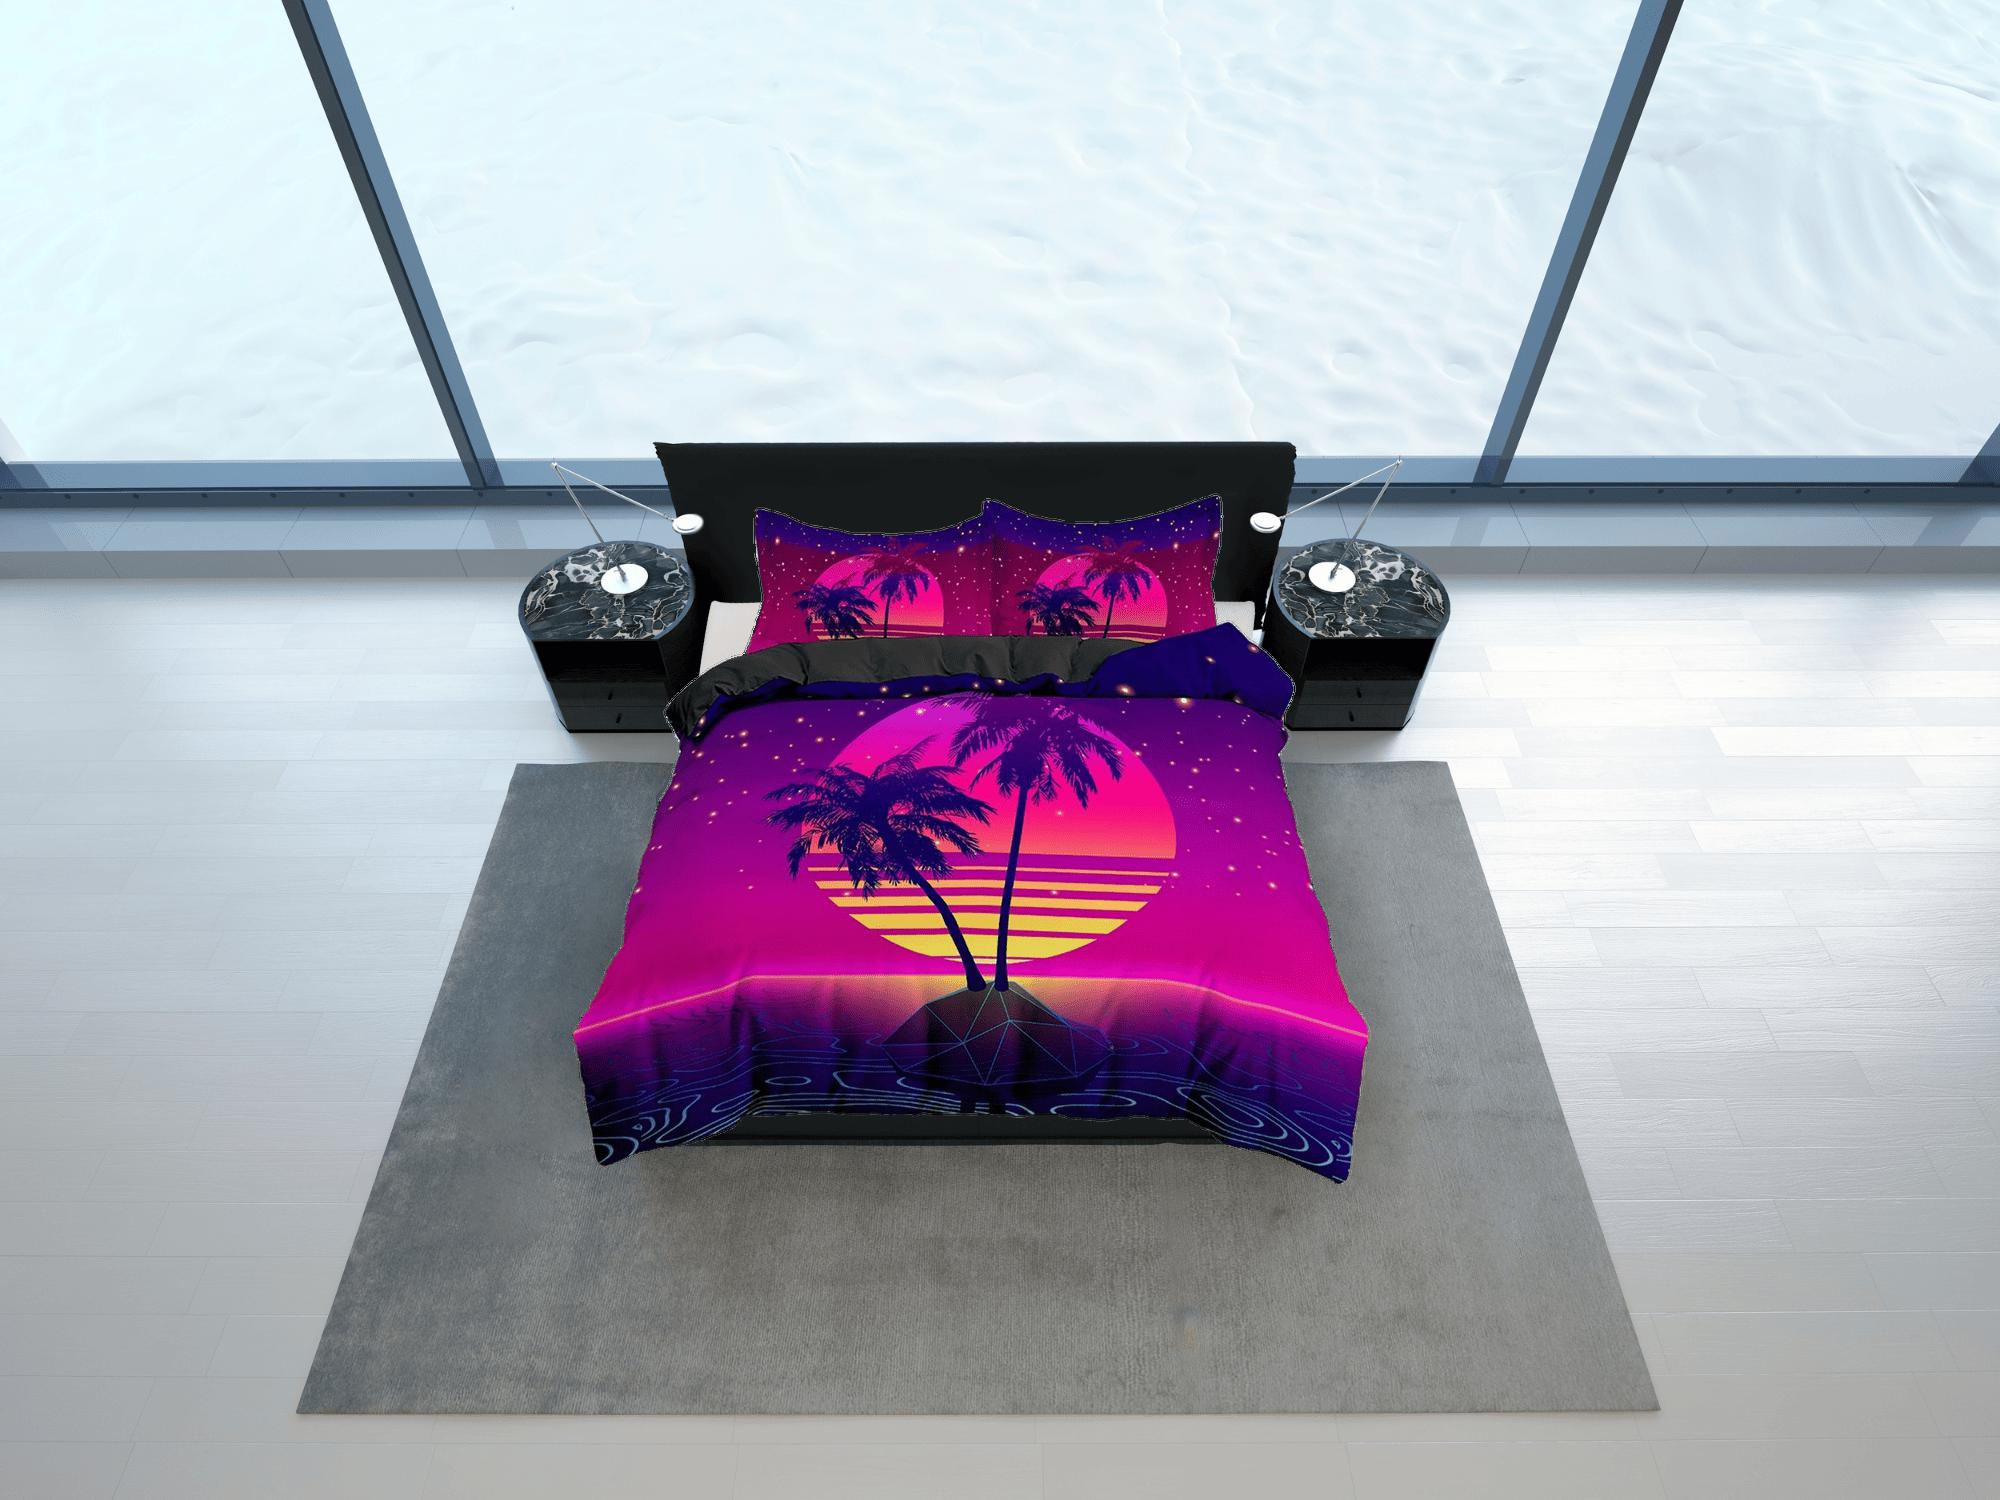 daintyduvet Vaporwave Sunset in Tropical Beach Bedding, Cool Hippie Pink Purple Duvet Cover Set, Trippy Psychedelic Bed Cover 90s Nostalgia Unisex